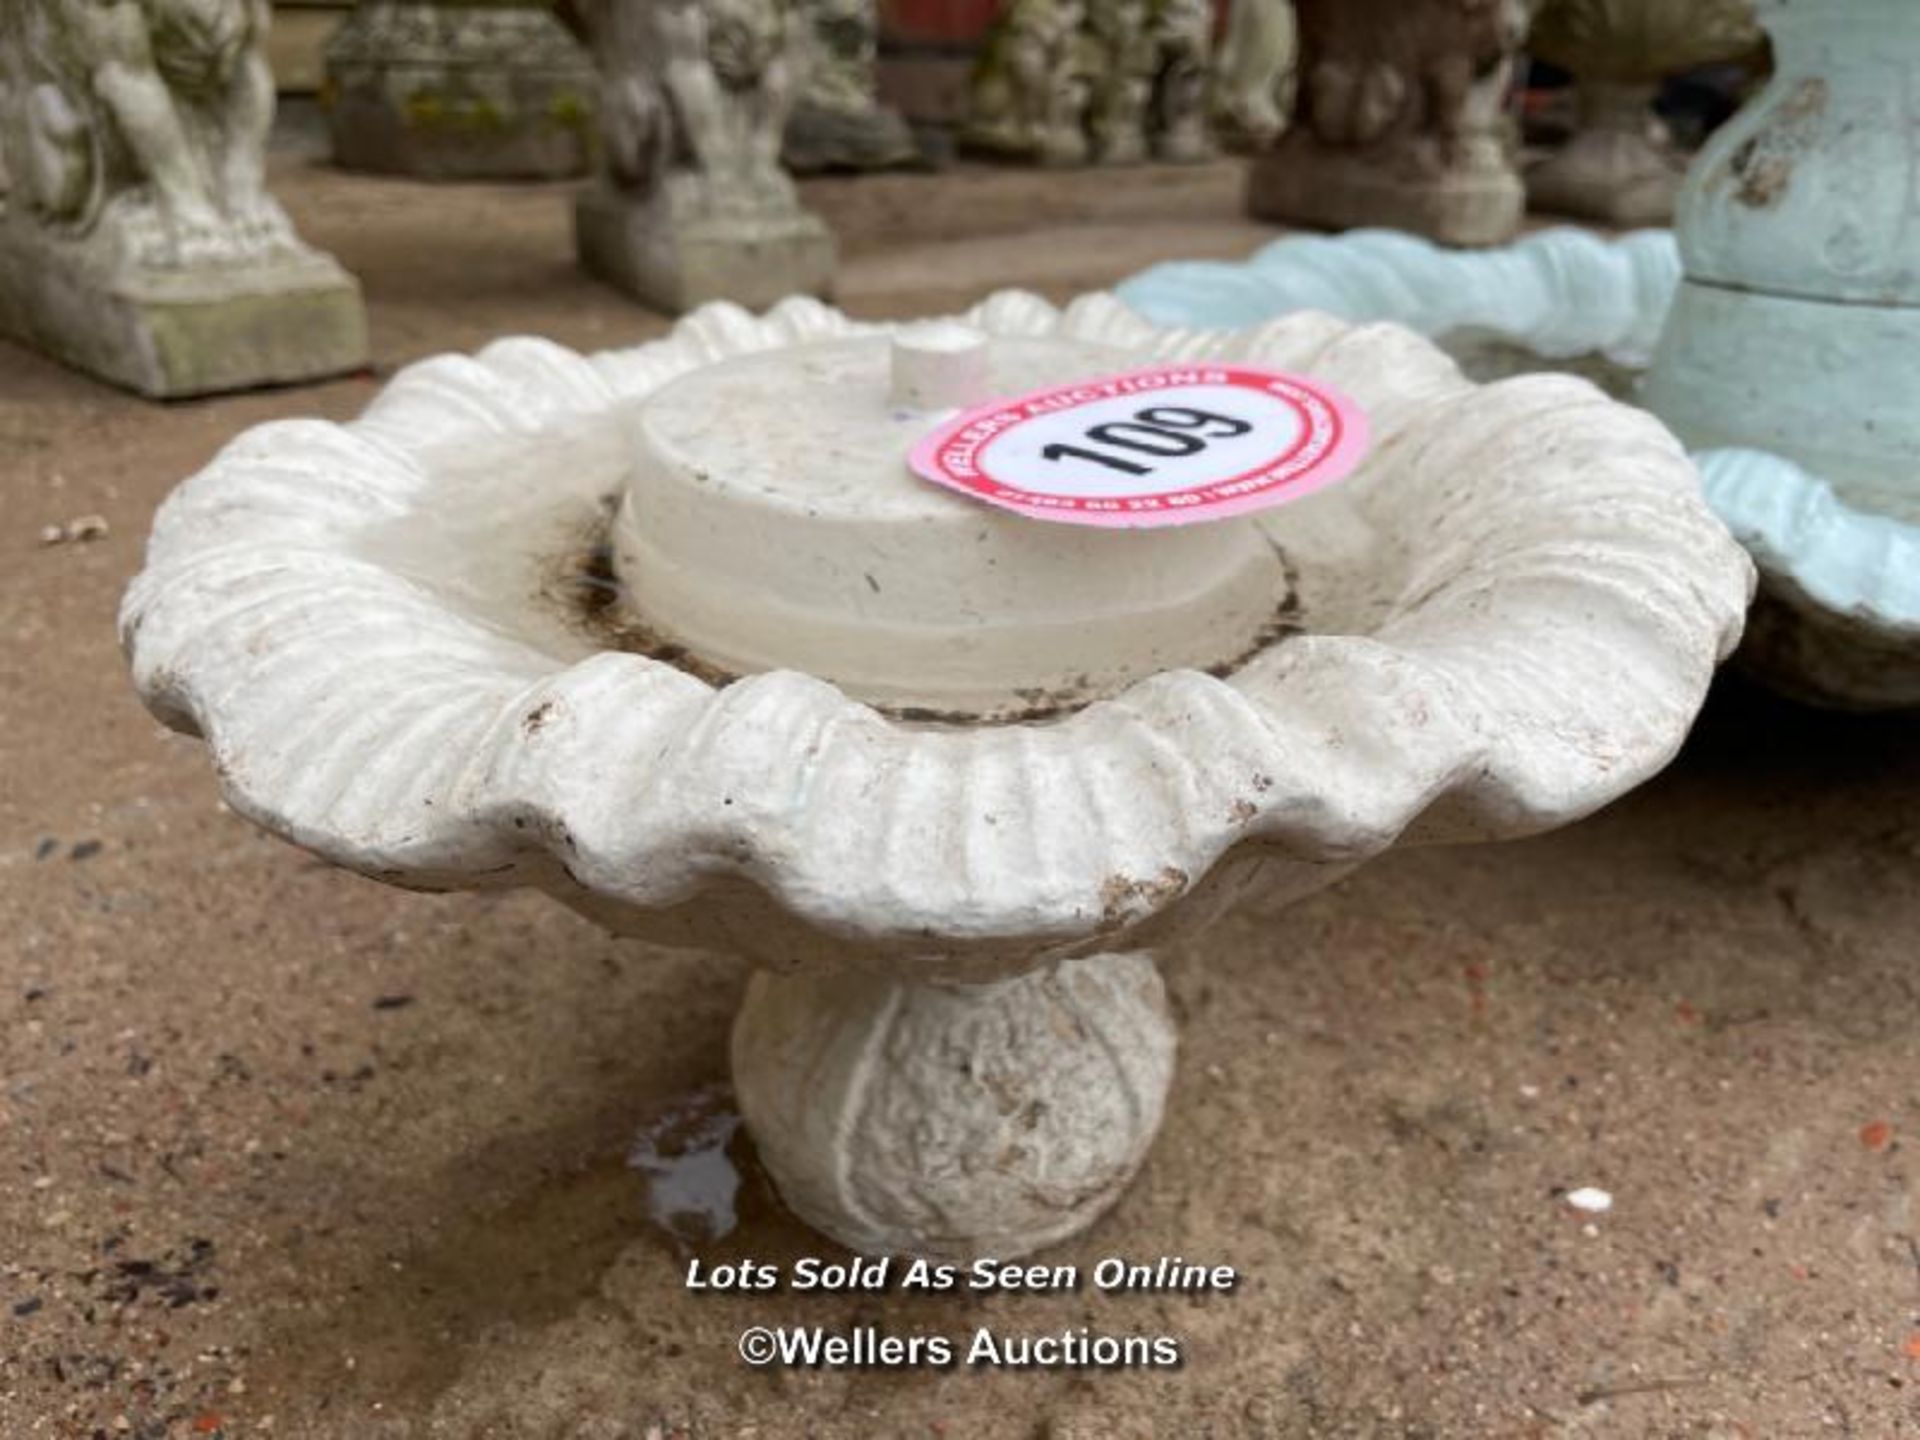 *PART OF A FOUNTAIN, 8 HIGH X 13 DIAMETER / ALL LOTS ARE LOCATED AT AUTHENTIC RECLAMATION TN5 7EF